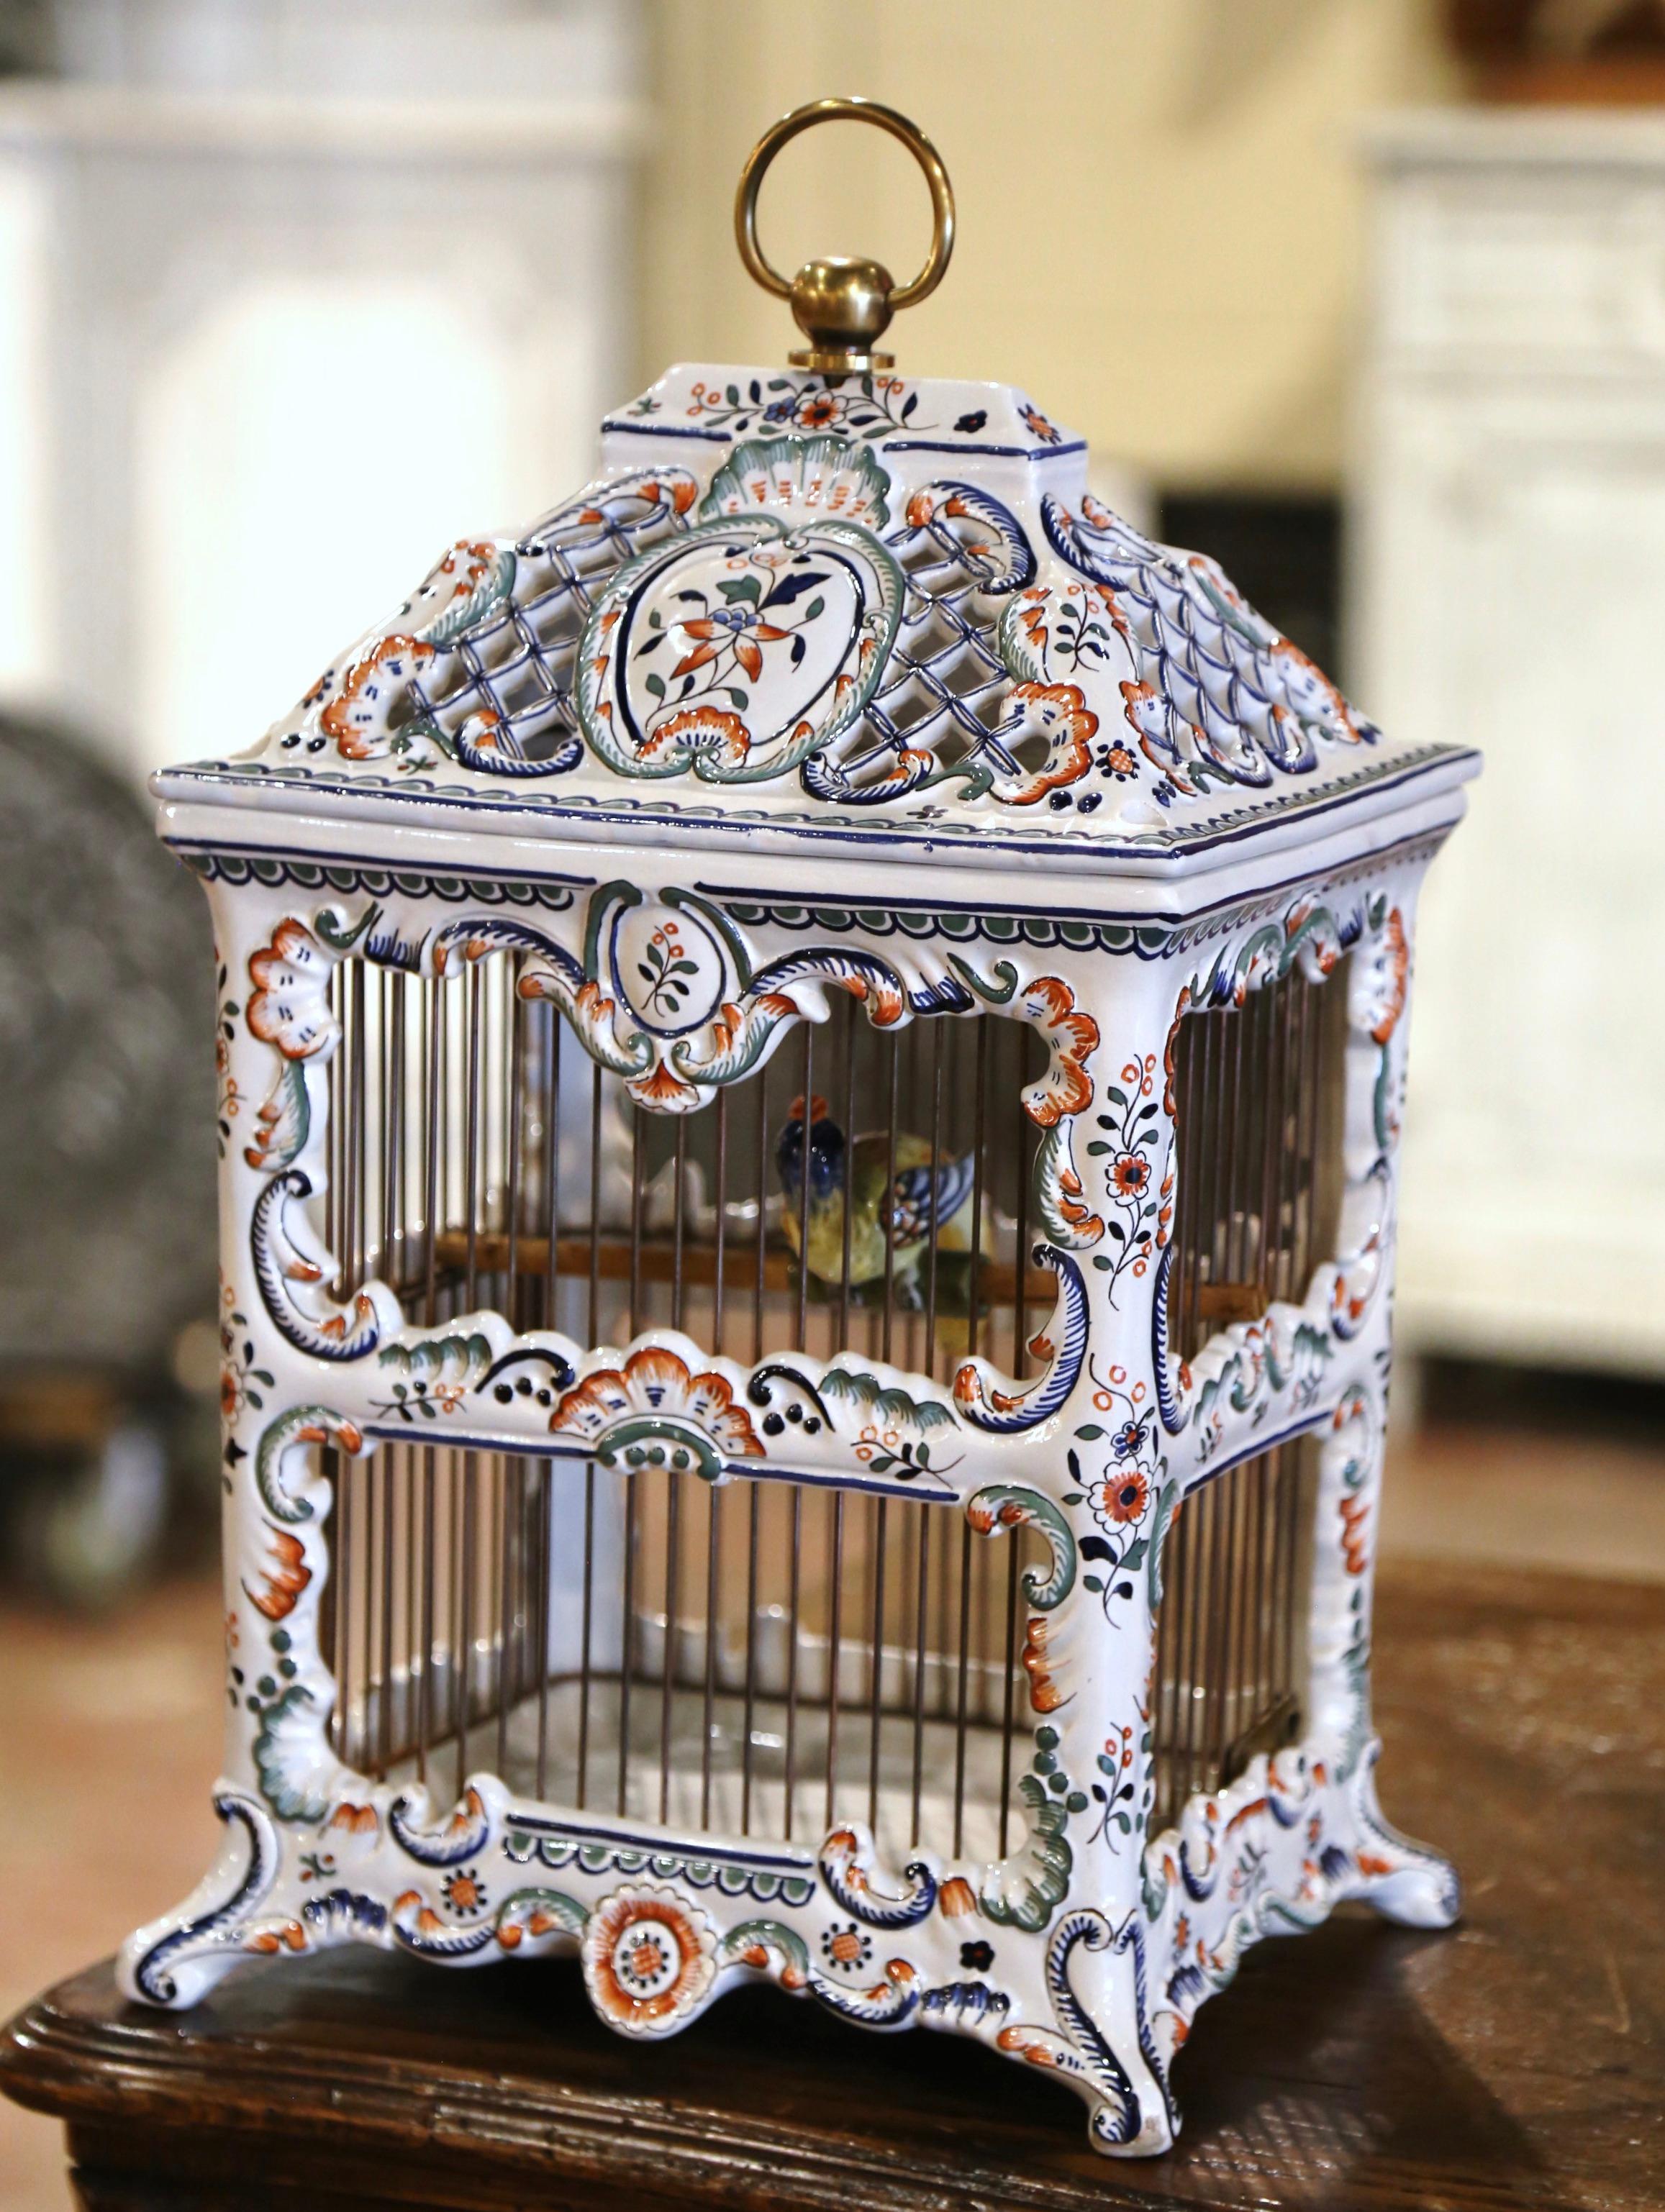 Hand-Crafted Midcentury French Decorative Hand Painted Porcelain Birdcage from Normandy